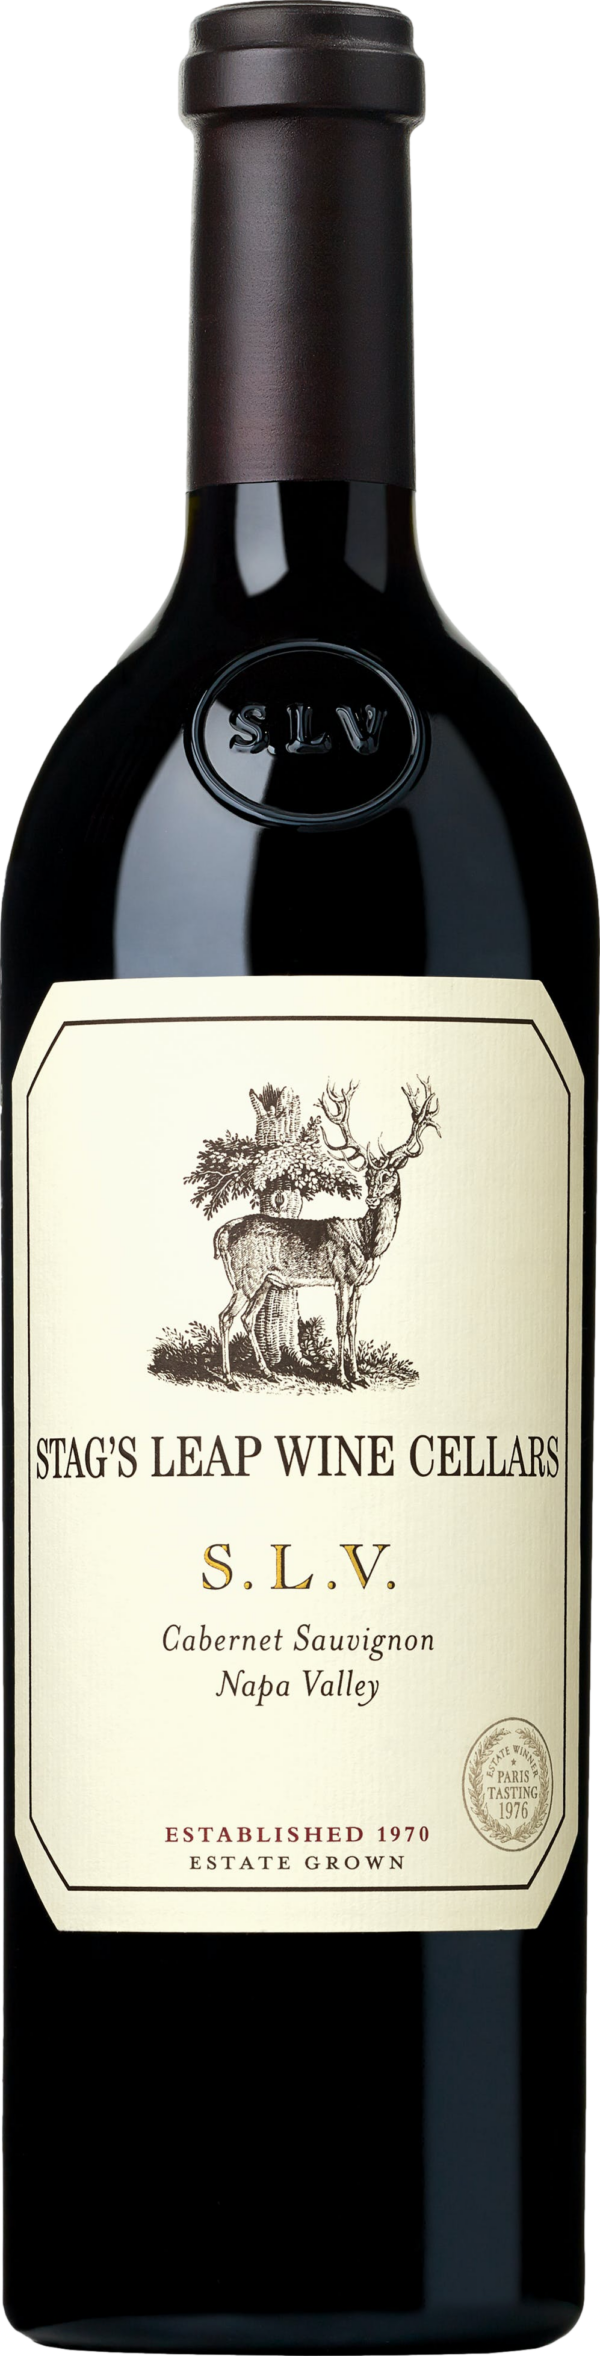 Product image of Stag's Leap Wine Cellars SLV Cabernet Sauvignon 2019 from 8wines